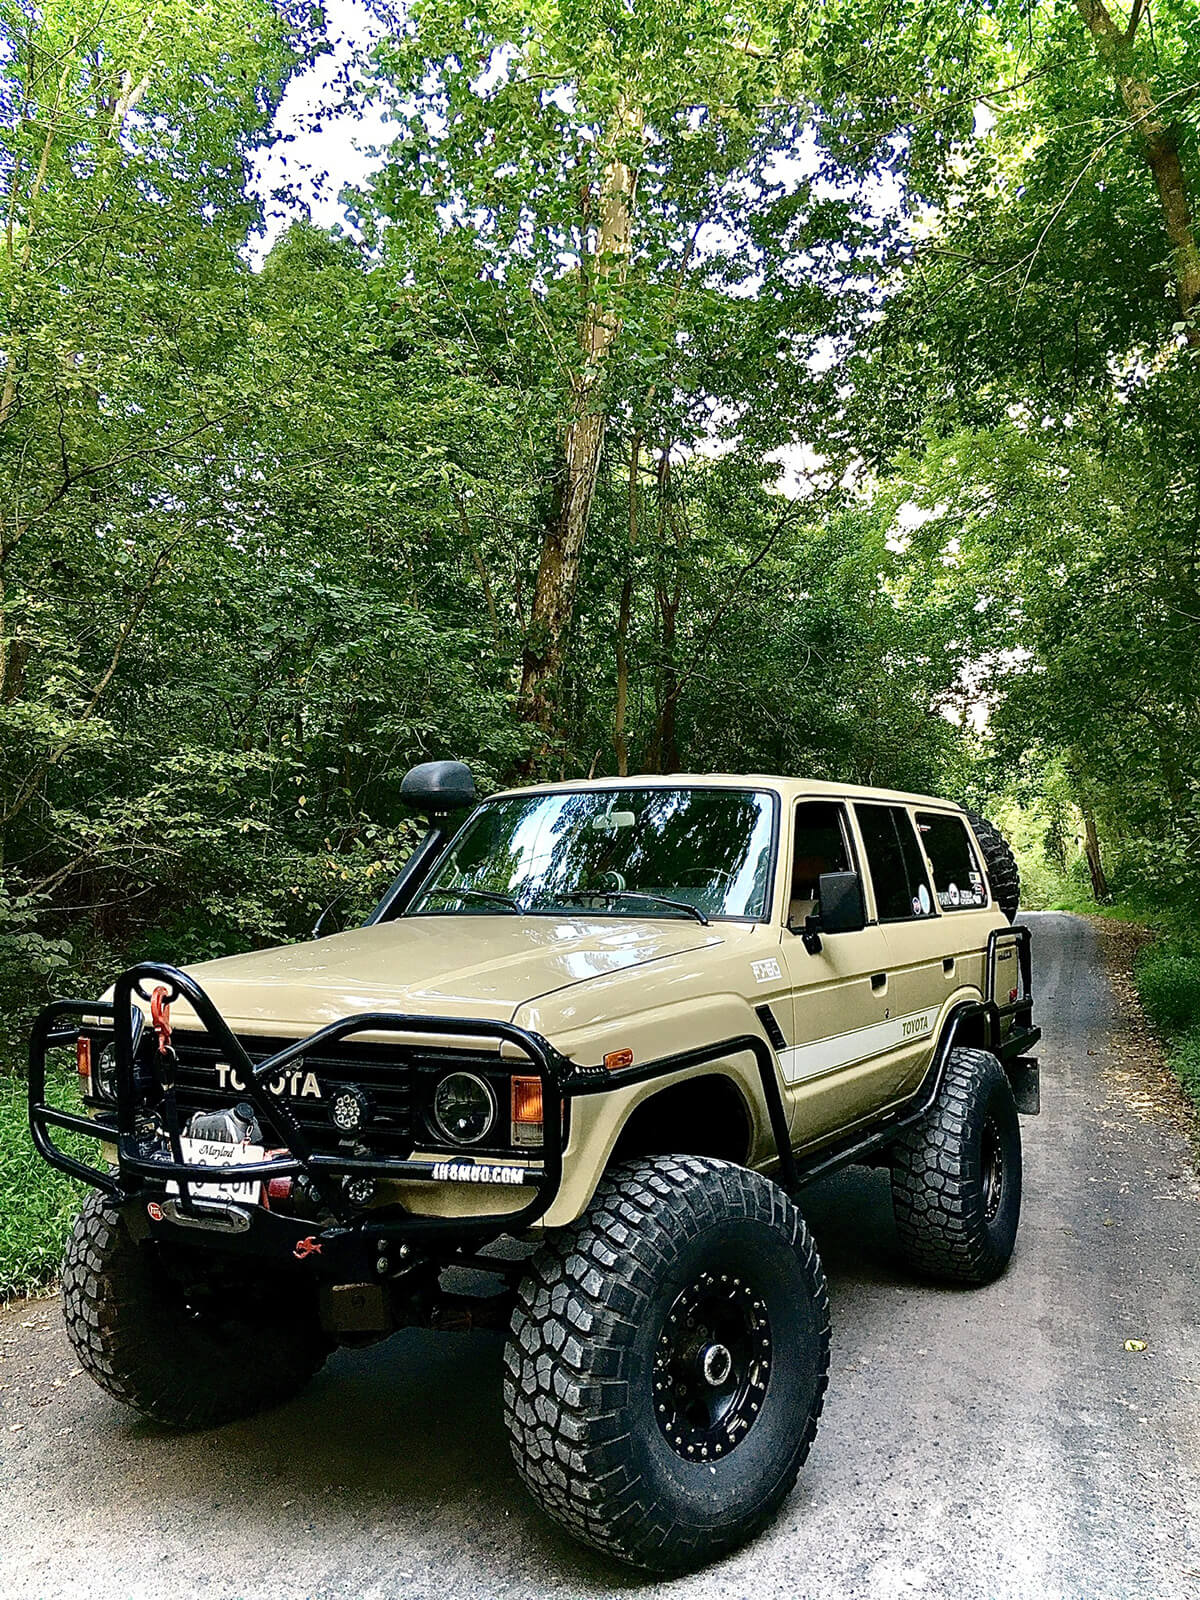 Lifted Toyota Land Cruiser off-road build - classic 4x4